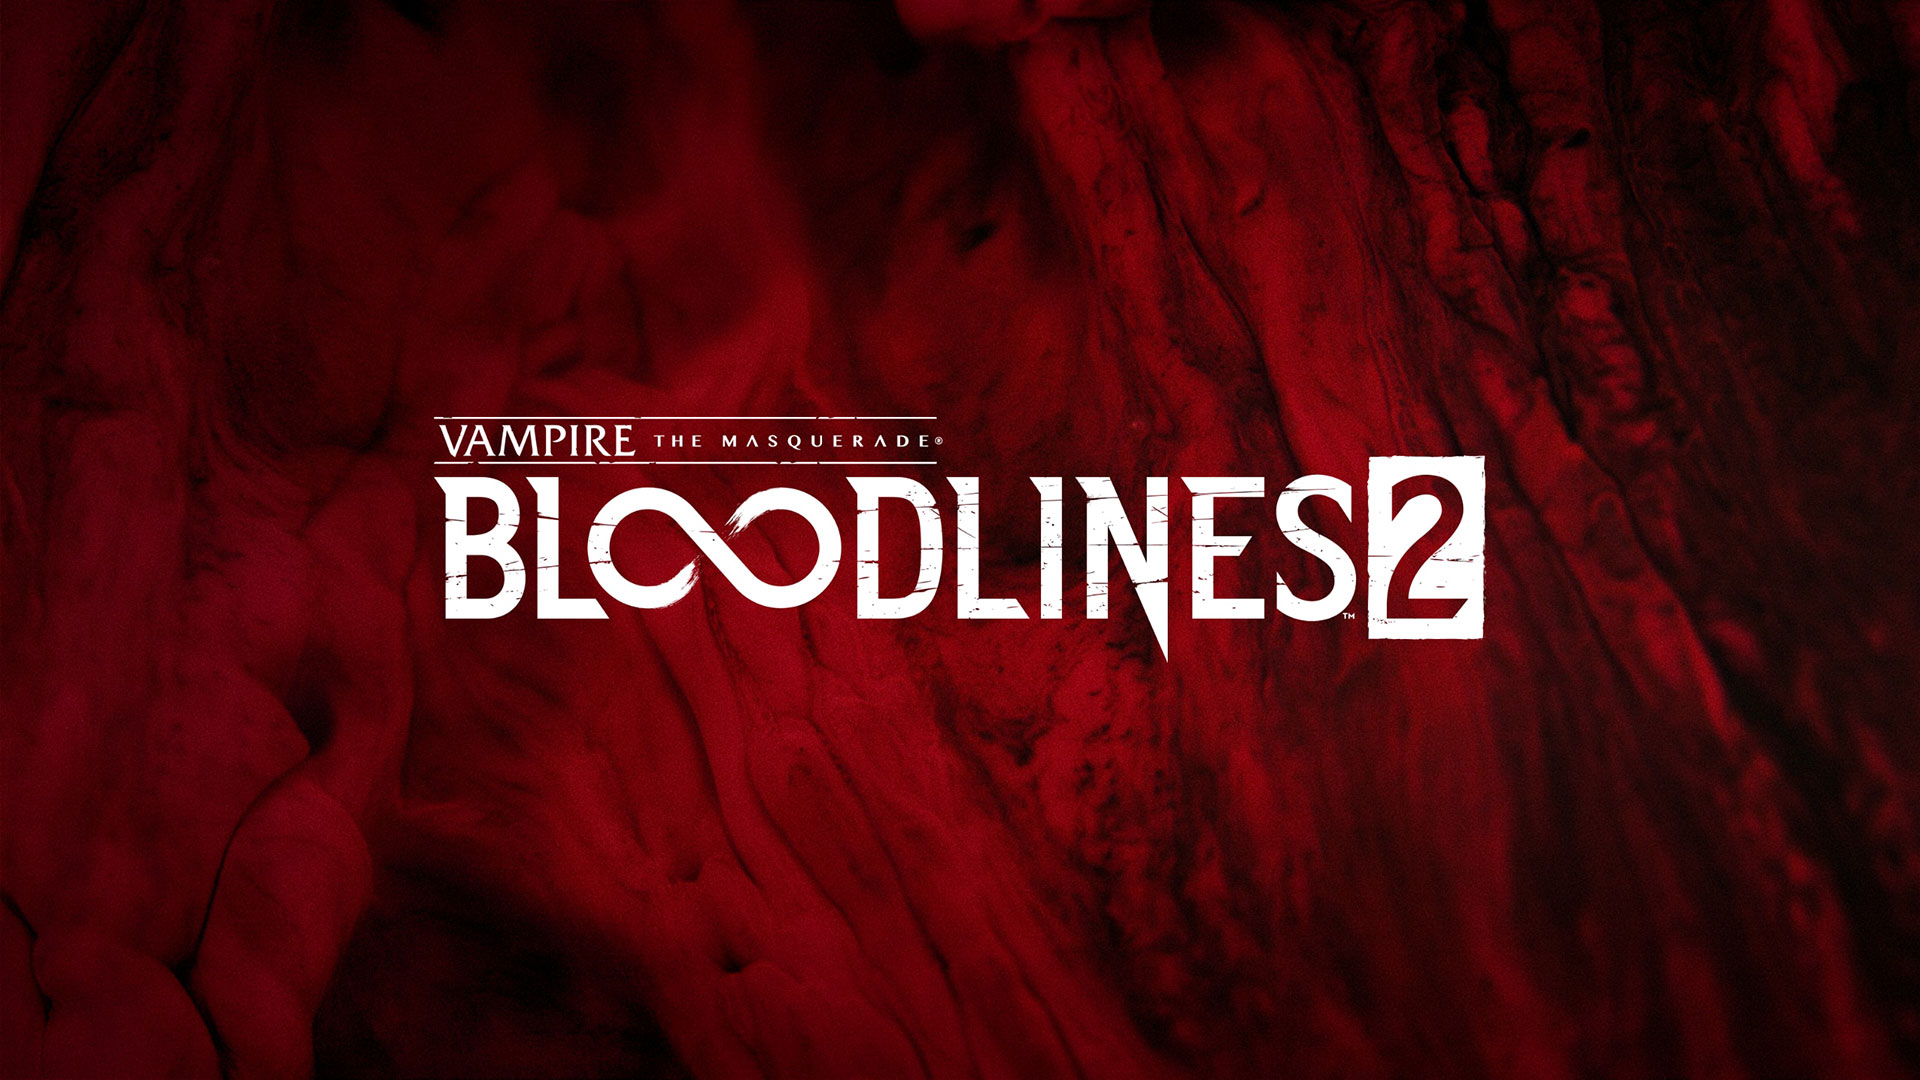 Vampire: The Masquerade - Bloodlines 2 is back with a new developer